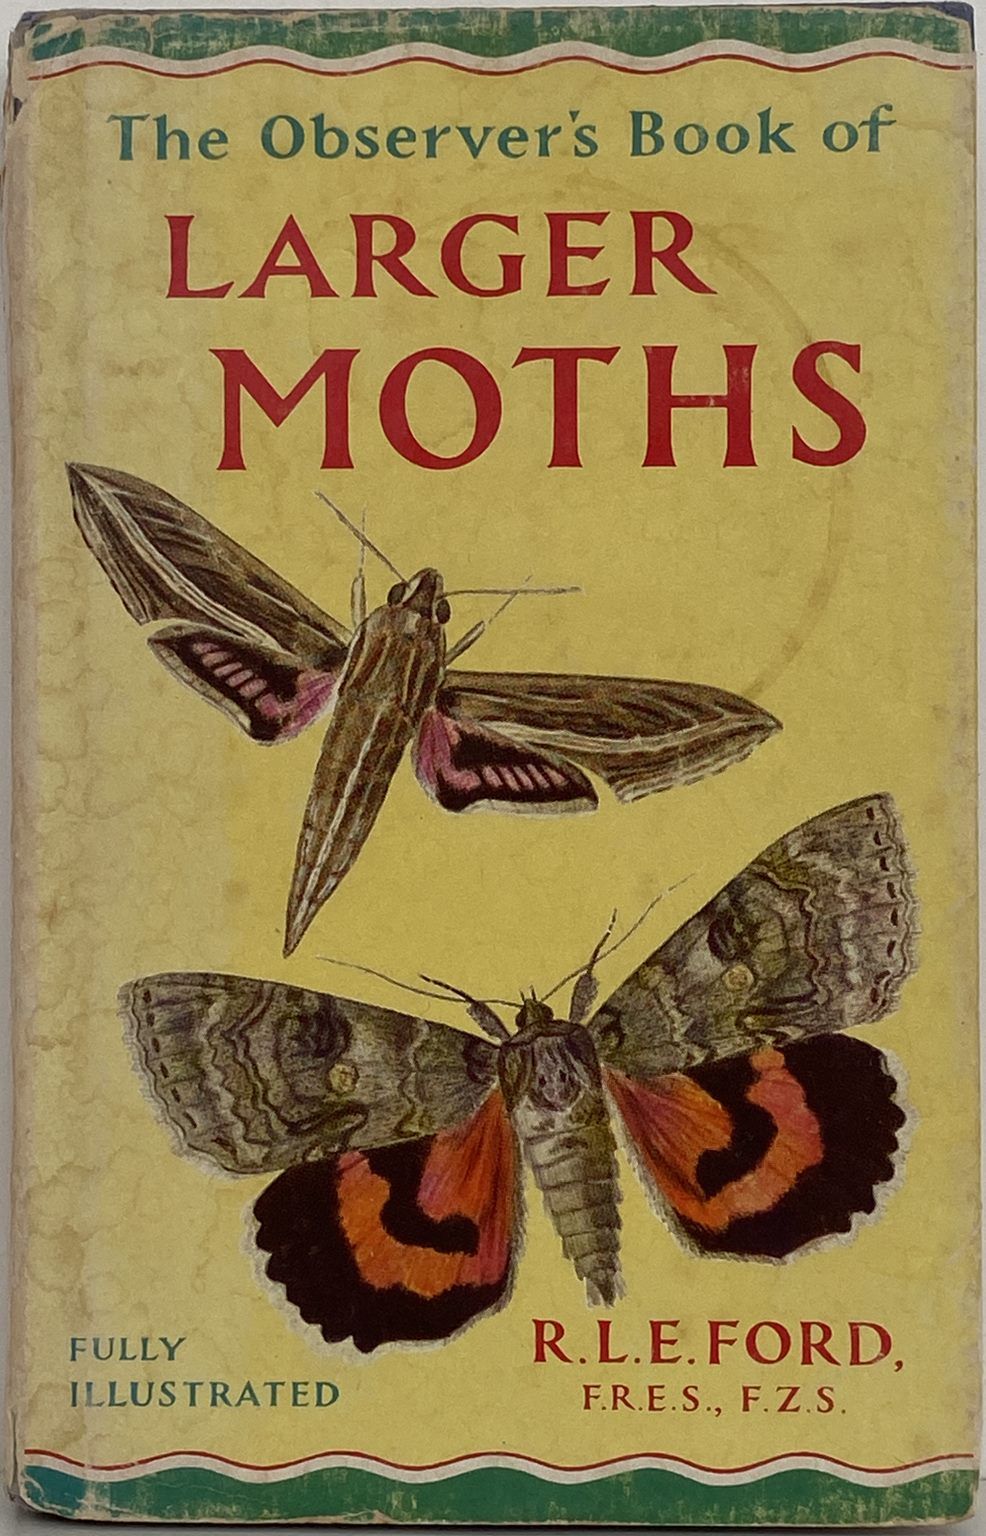 The Observer's Book of LARGER MOTHS